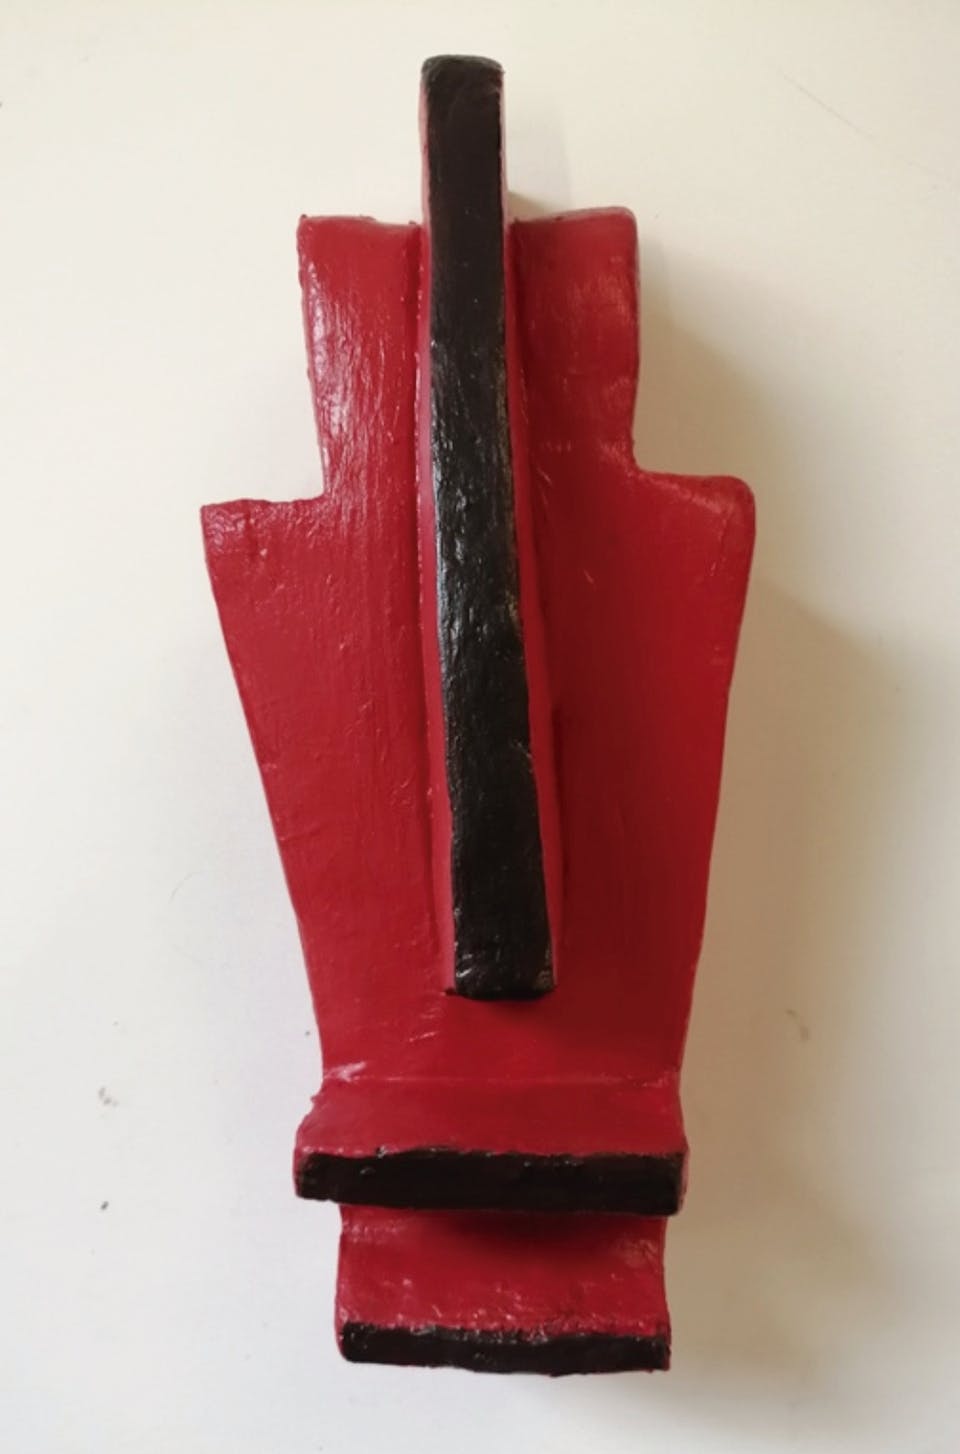 A geometric sculpture painted in red and black.